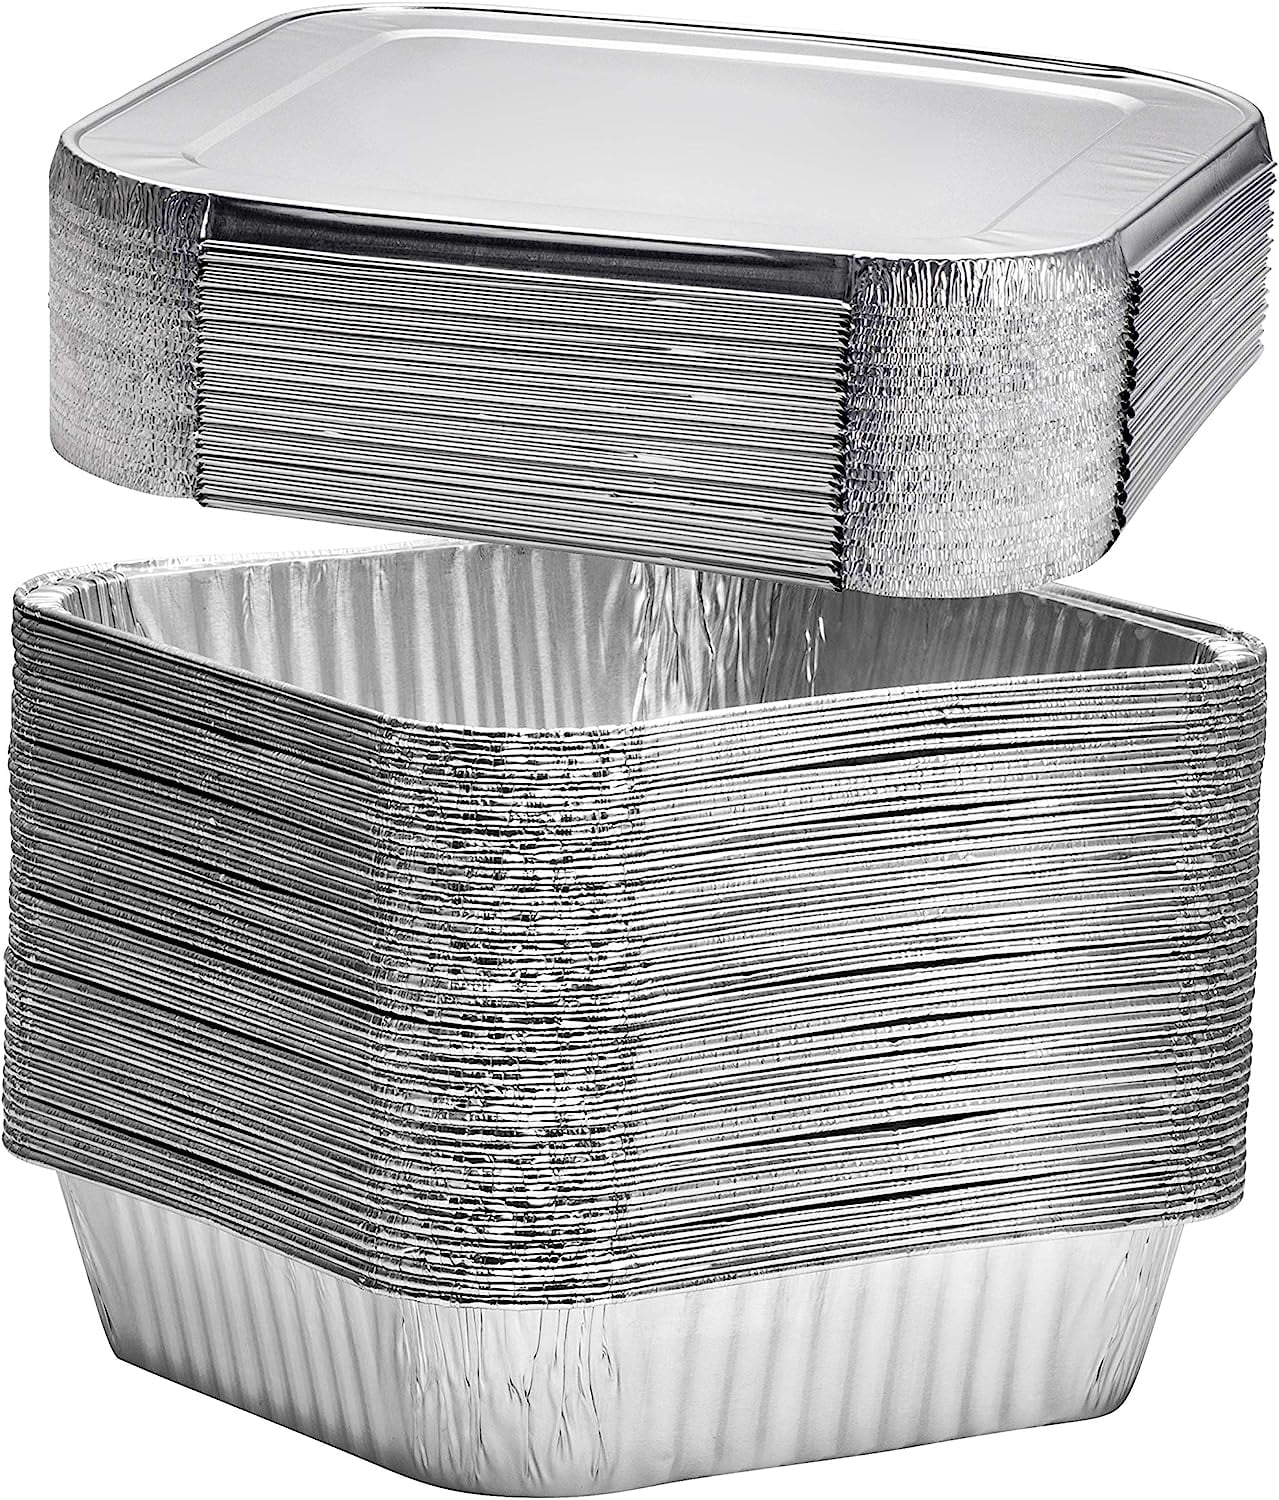 Ekco - Aluminum Pans Disposable, 25-count - 18x13”(2.53” Depth) Aluminum  Foil Pans for Baking, Roasting & Grilling - Reheating Container for Meal